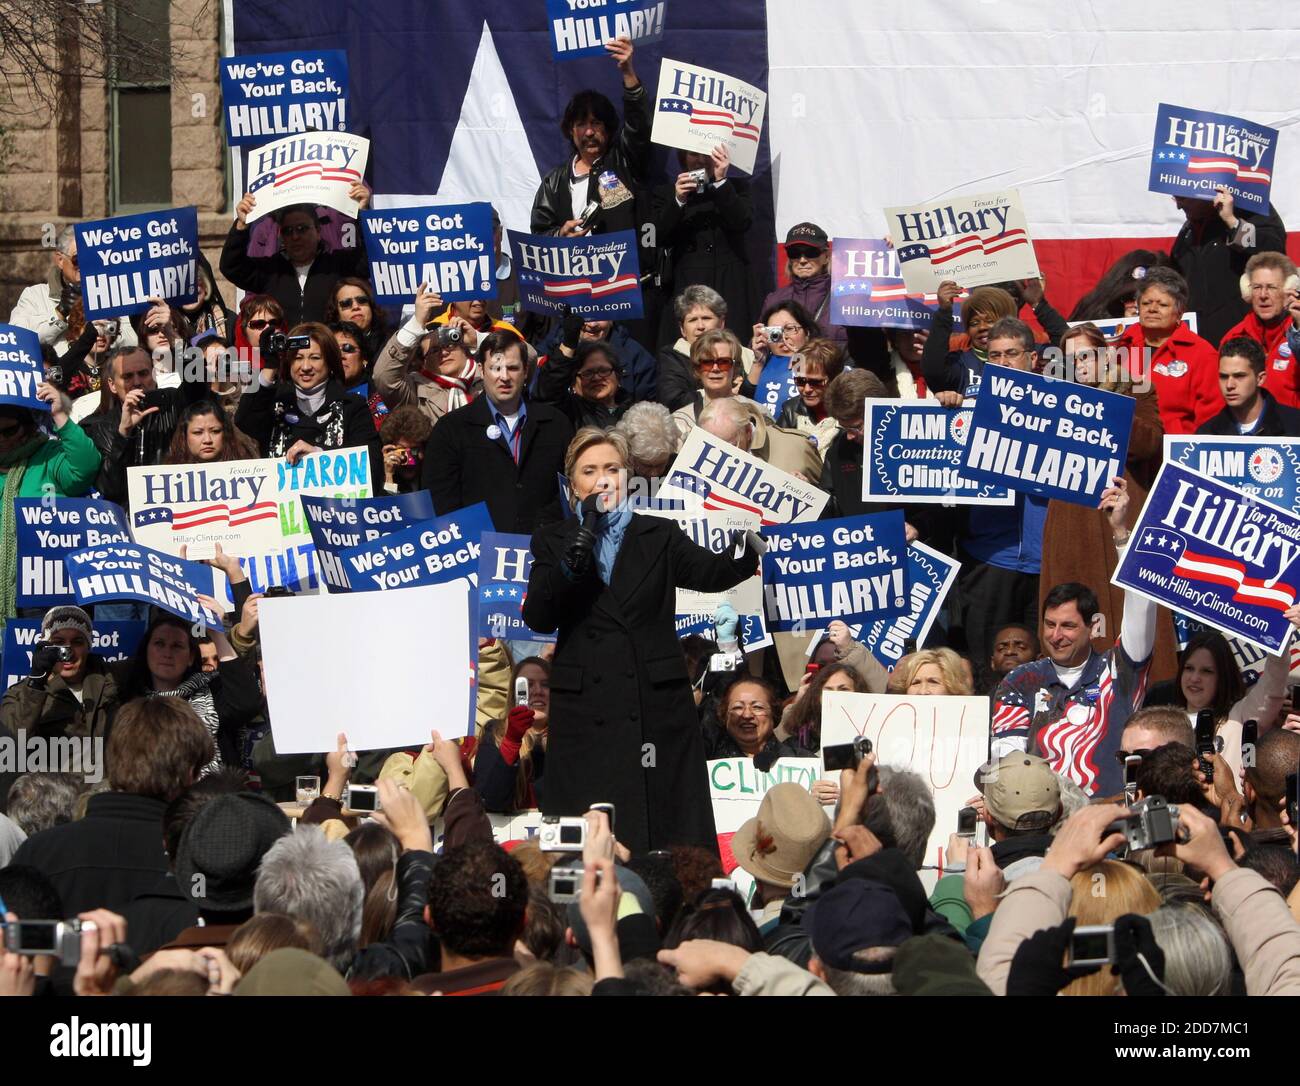 Hillary Clinton speaks to supporters in downtown Fort Worth, TX, USA, on Friday February 22, 2008. Clinton cut her visit short following the death a Dallas police officer working the candidate's motorcade. Photo by Ron T. Ennis/Fort Worth Star-Telegram/MCT/ABACAPRESS.COM Stock Photo